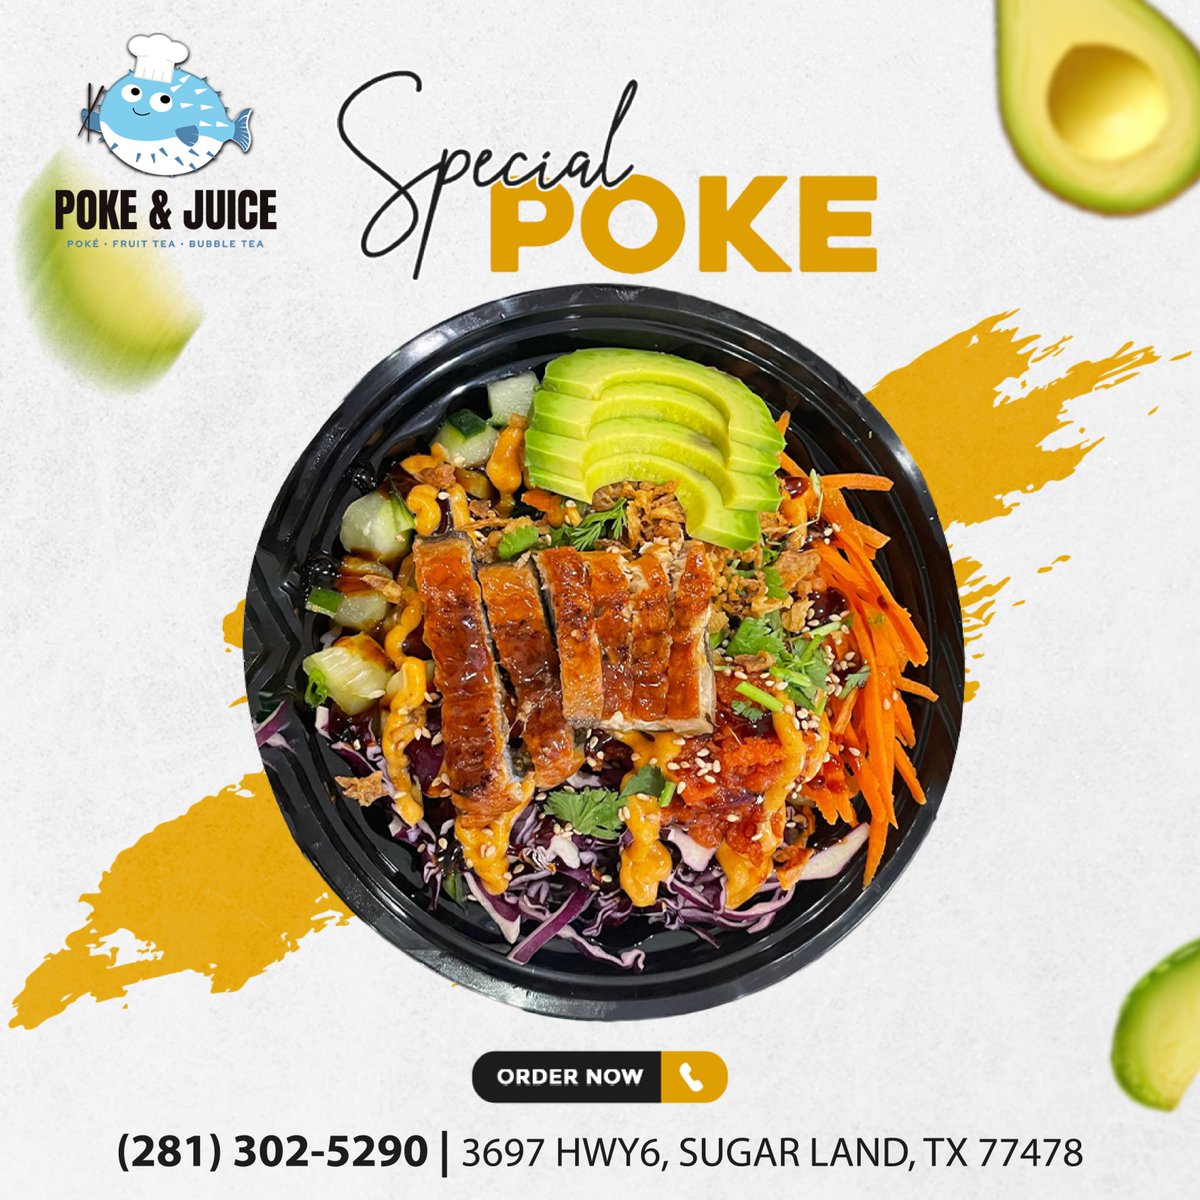 Is it lunchtime yet? Dreaming of this poke bowl masterpiece. 🥰🍽
#smoothierecipes #smoothiebowls #foodporno #inksup #foodpornph #smoothietime #drinksporn #drinkswithfriends #smoothieoftheday #smoothielove #smoothielover #freshprinceofbelair #smoothierecipe #foodpornitaly